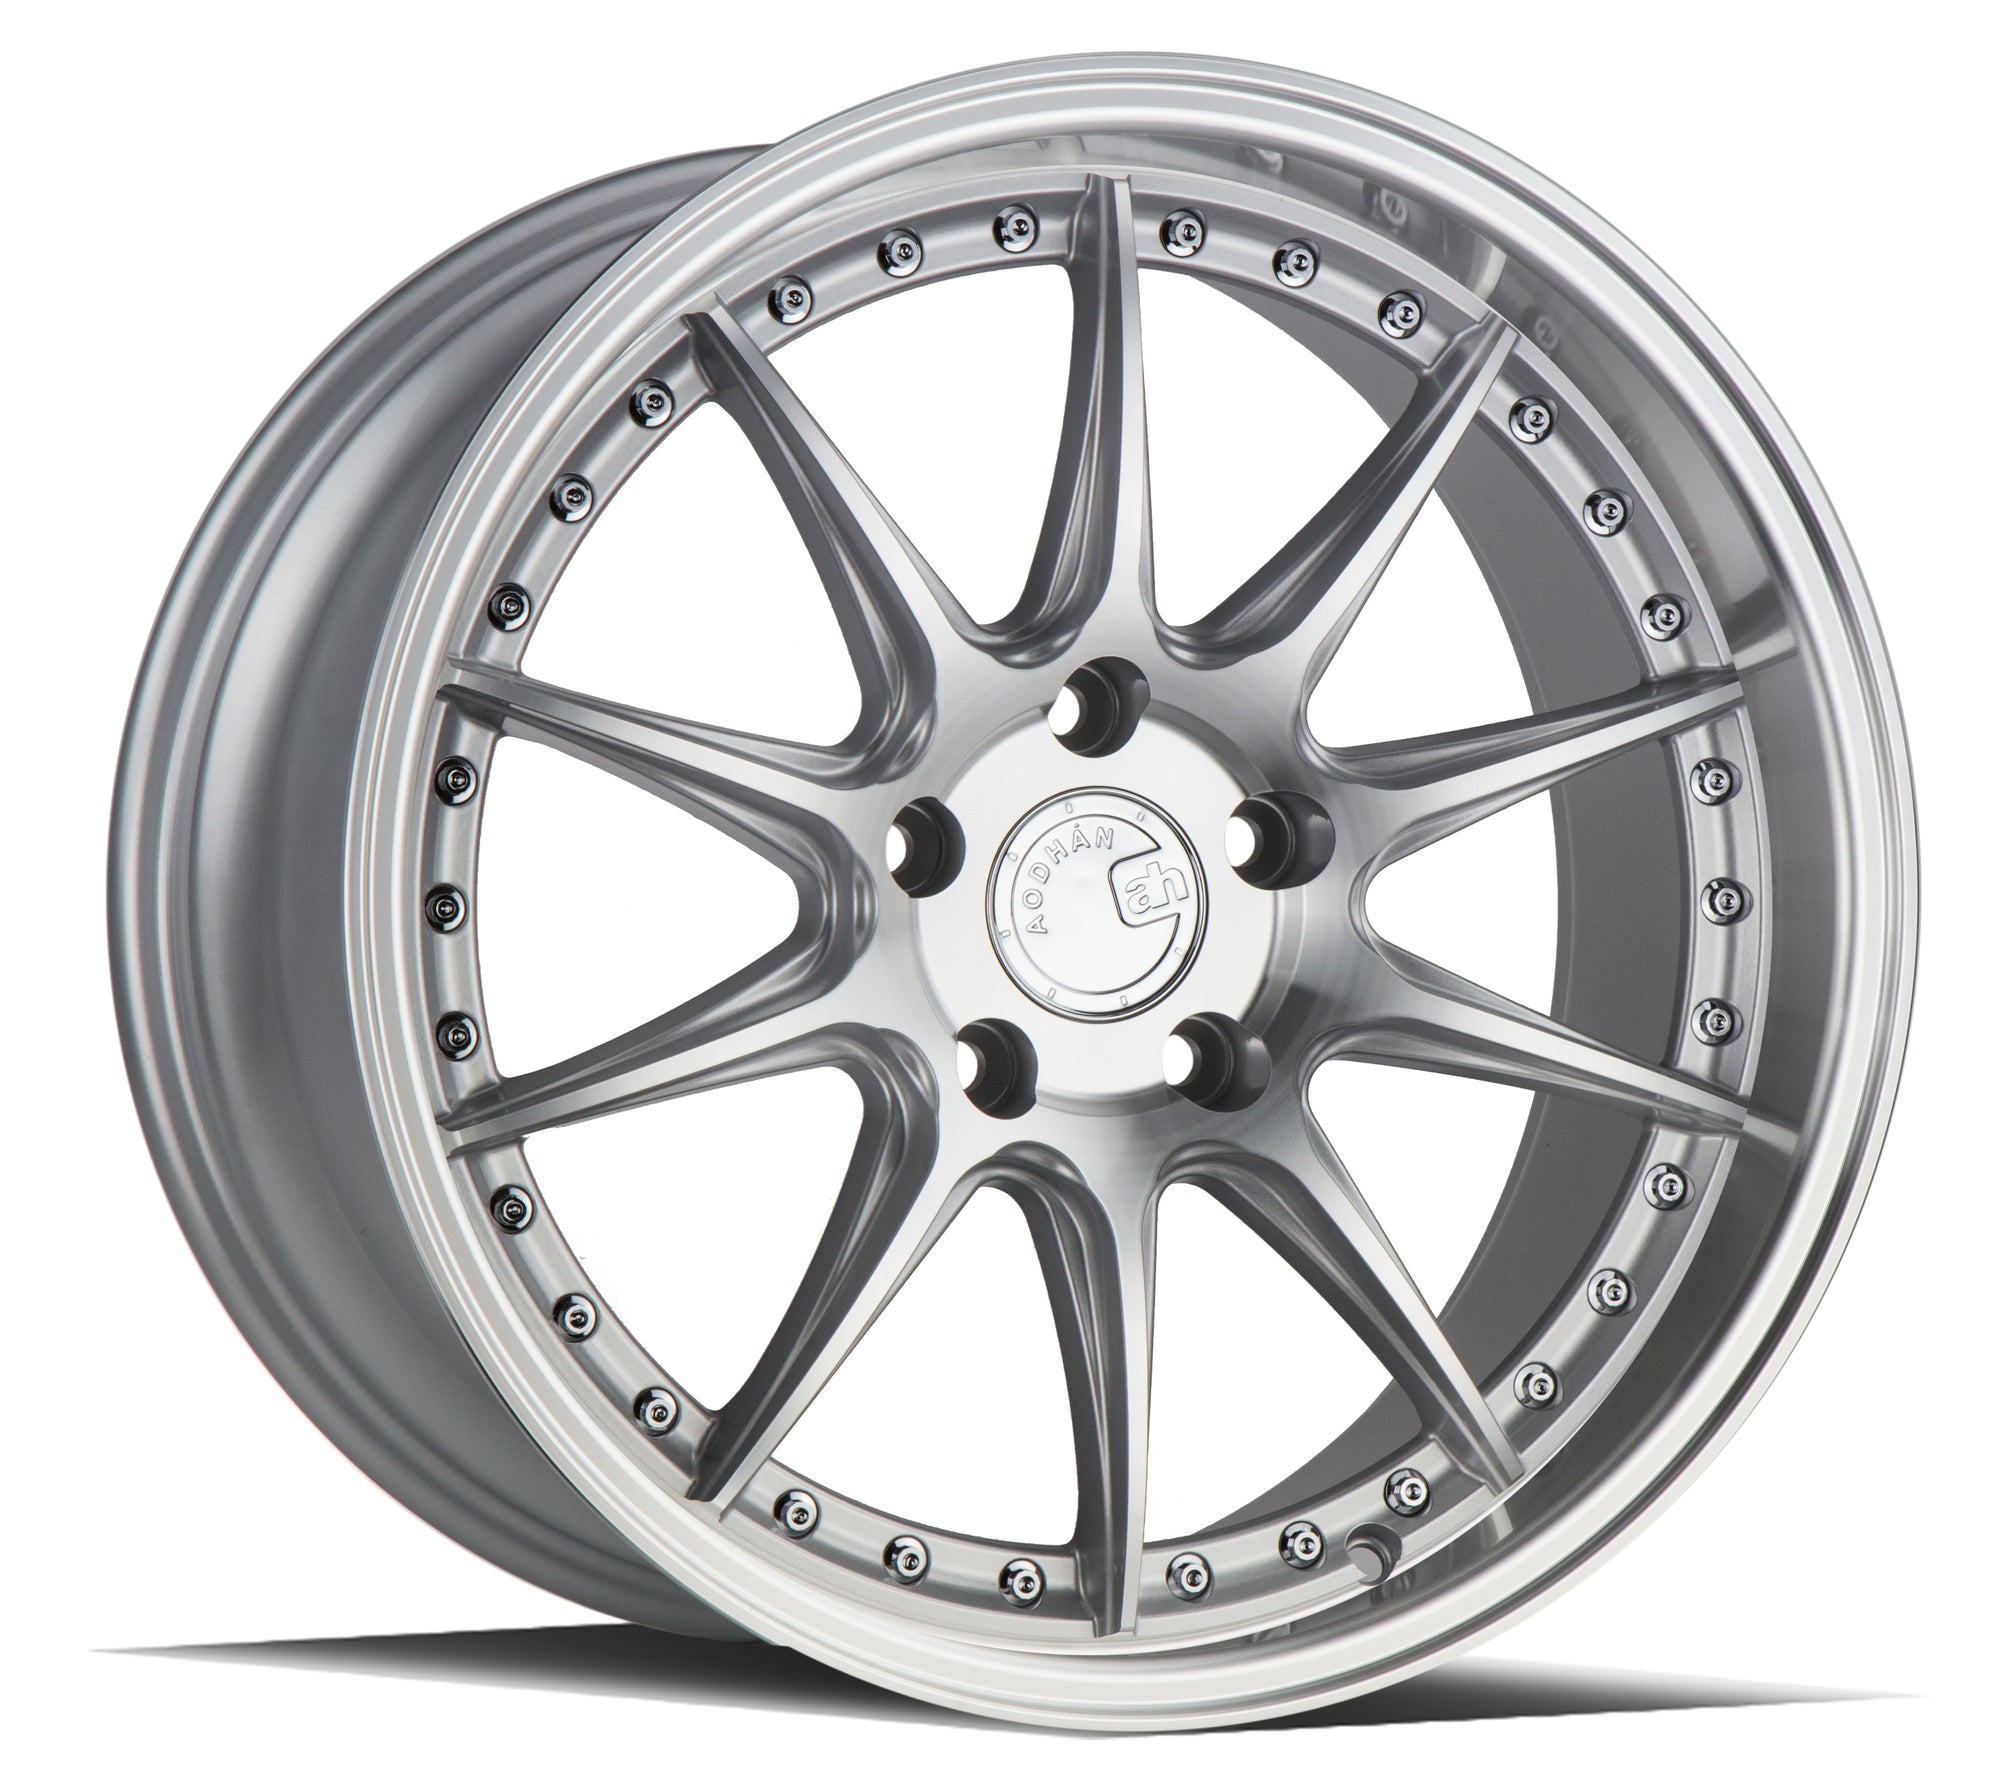 Aodhan DS07 18x9.5 5x114.3 +30 Silver w/Machined Face